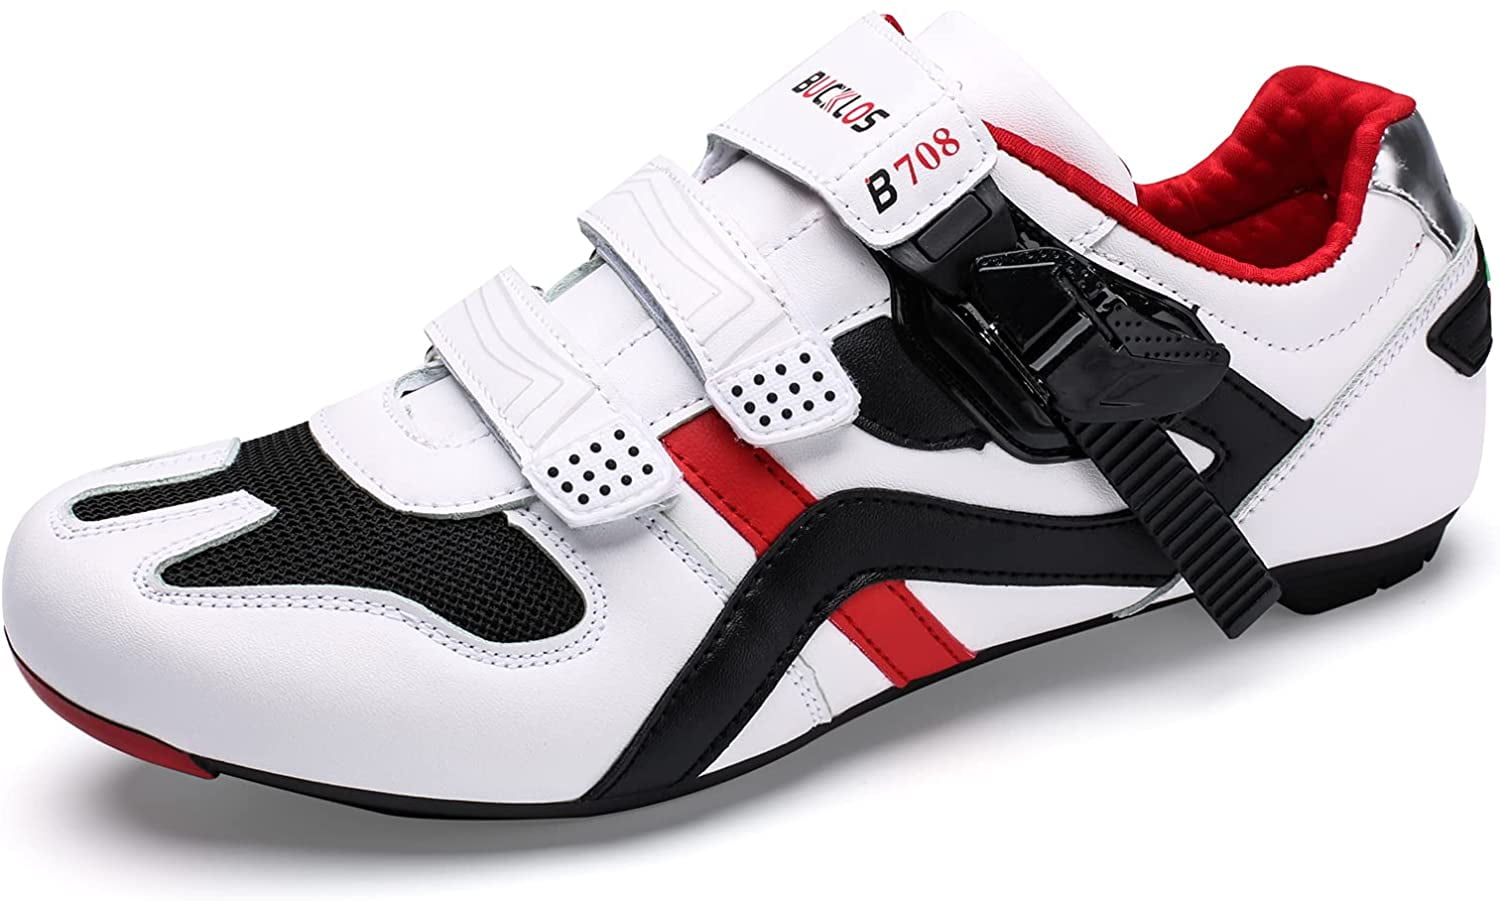 Details about   MTB Cycling Shoes Men Outdoor Mountain Road Bike Shoes Self-Locking SPD Sneakers 